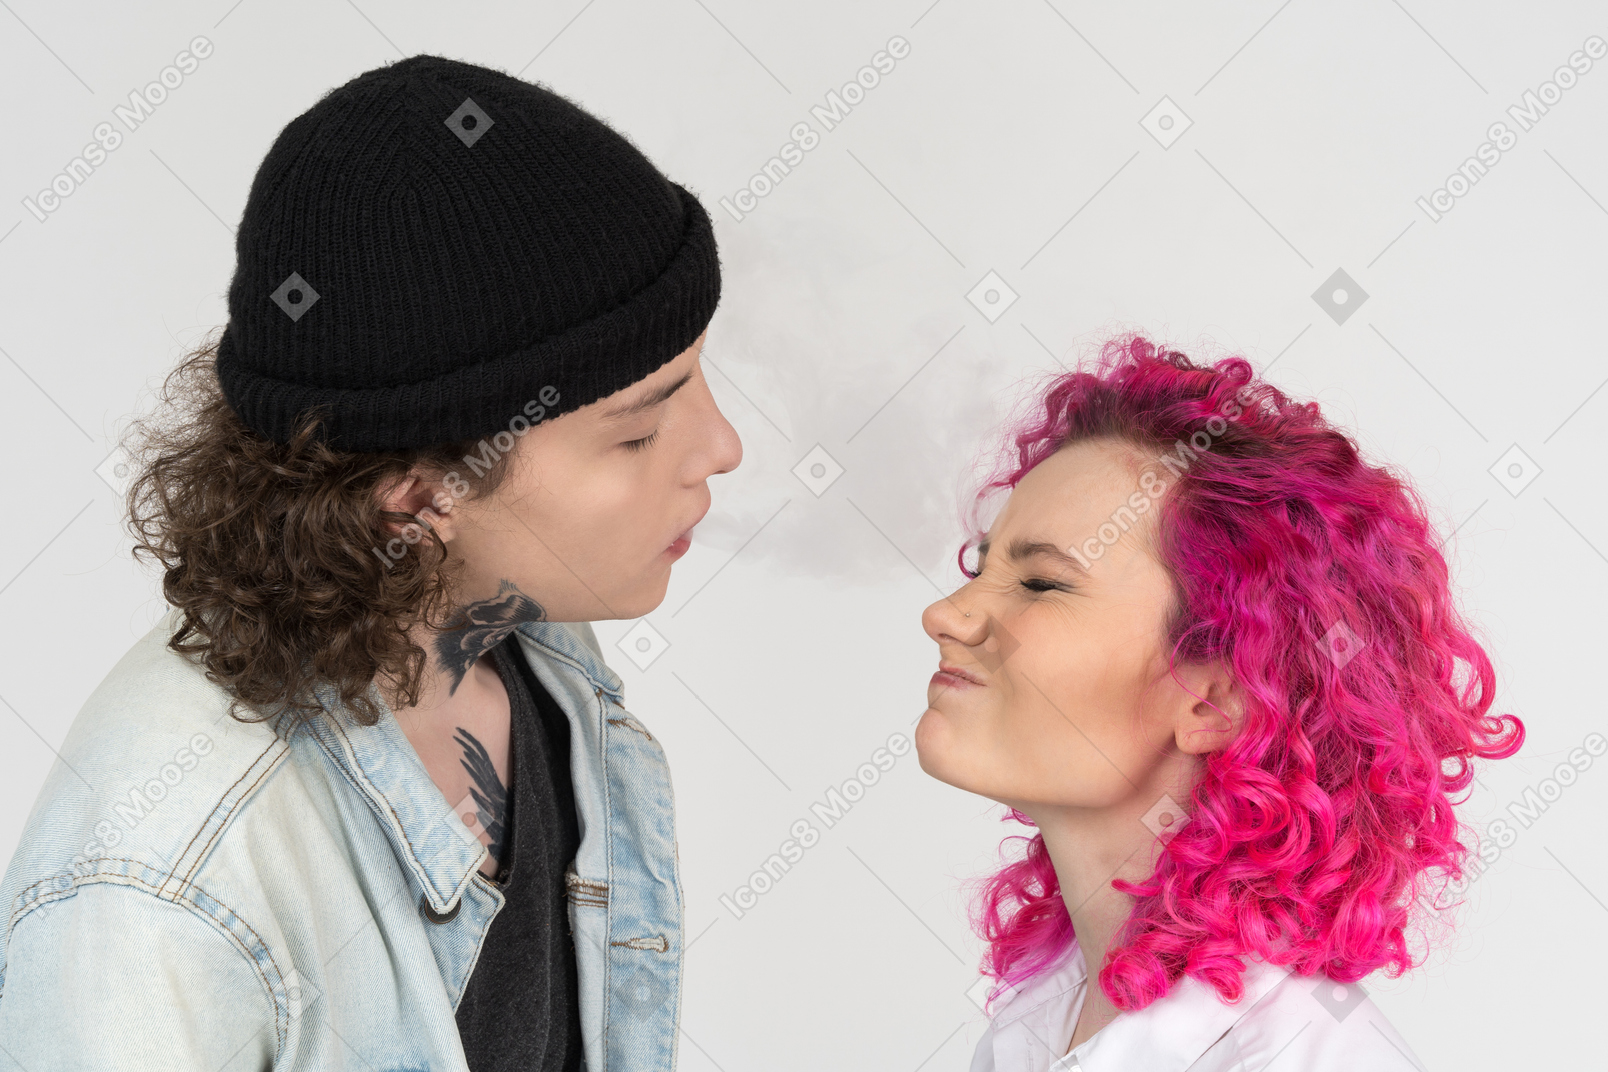 Male blowing smoke to his girlfriend's face